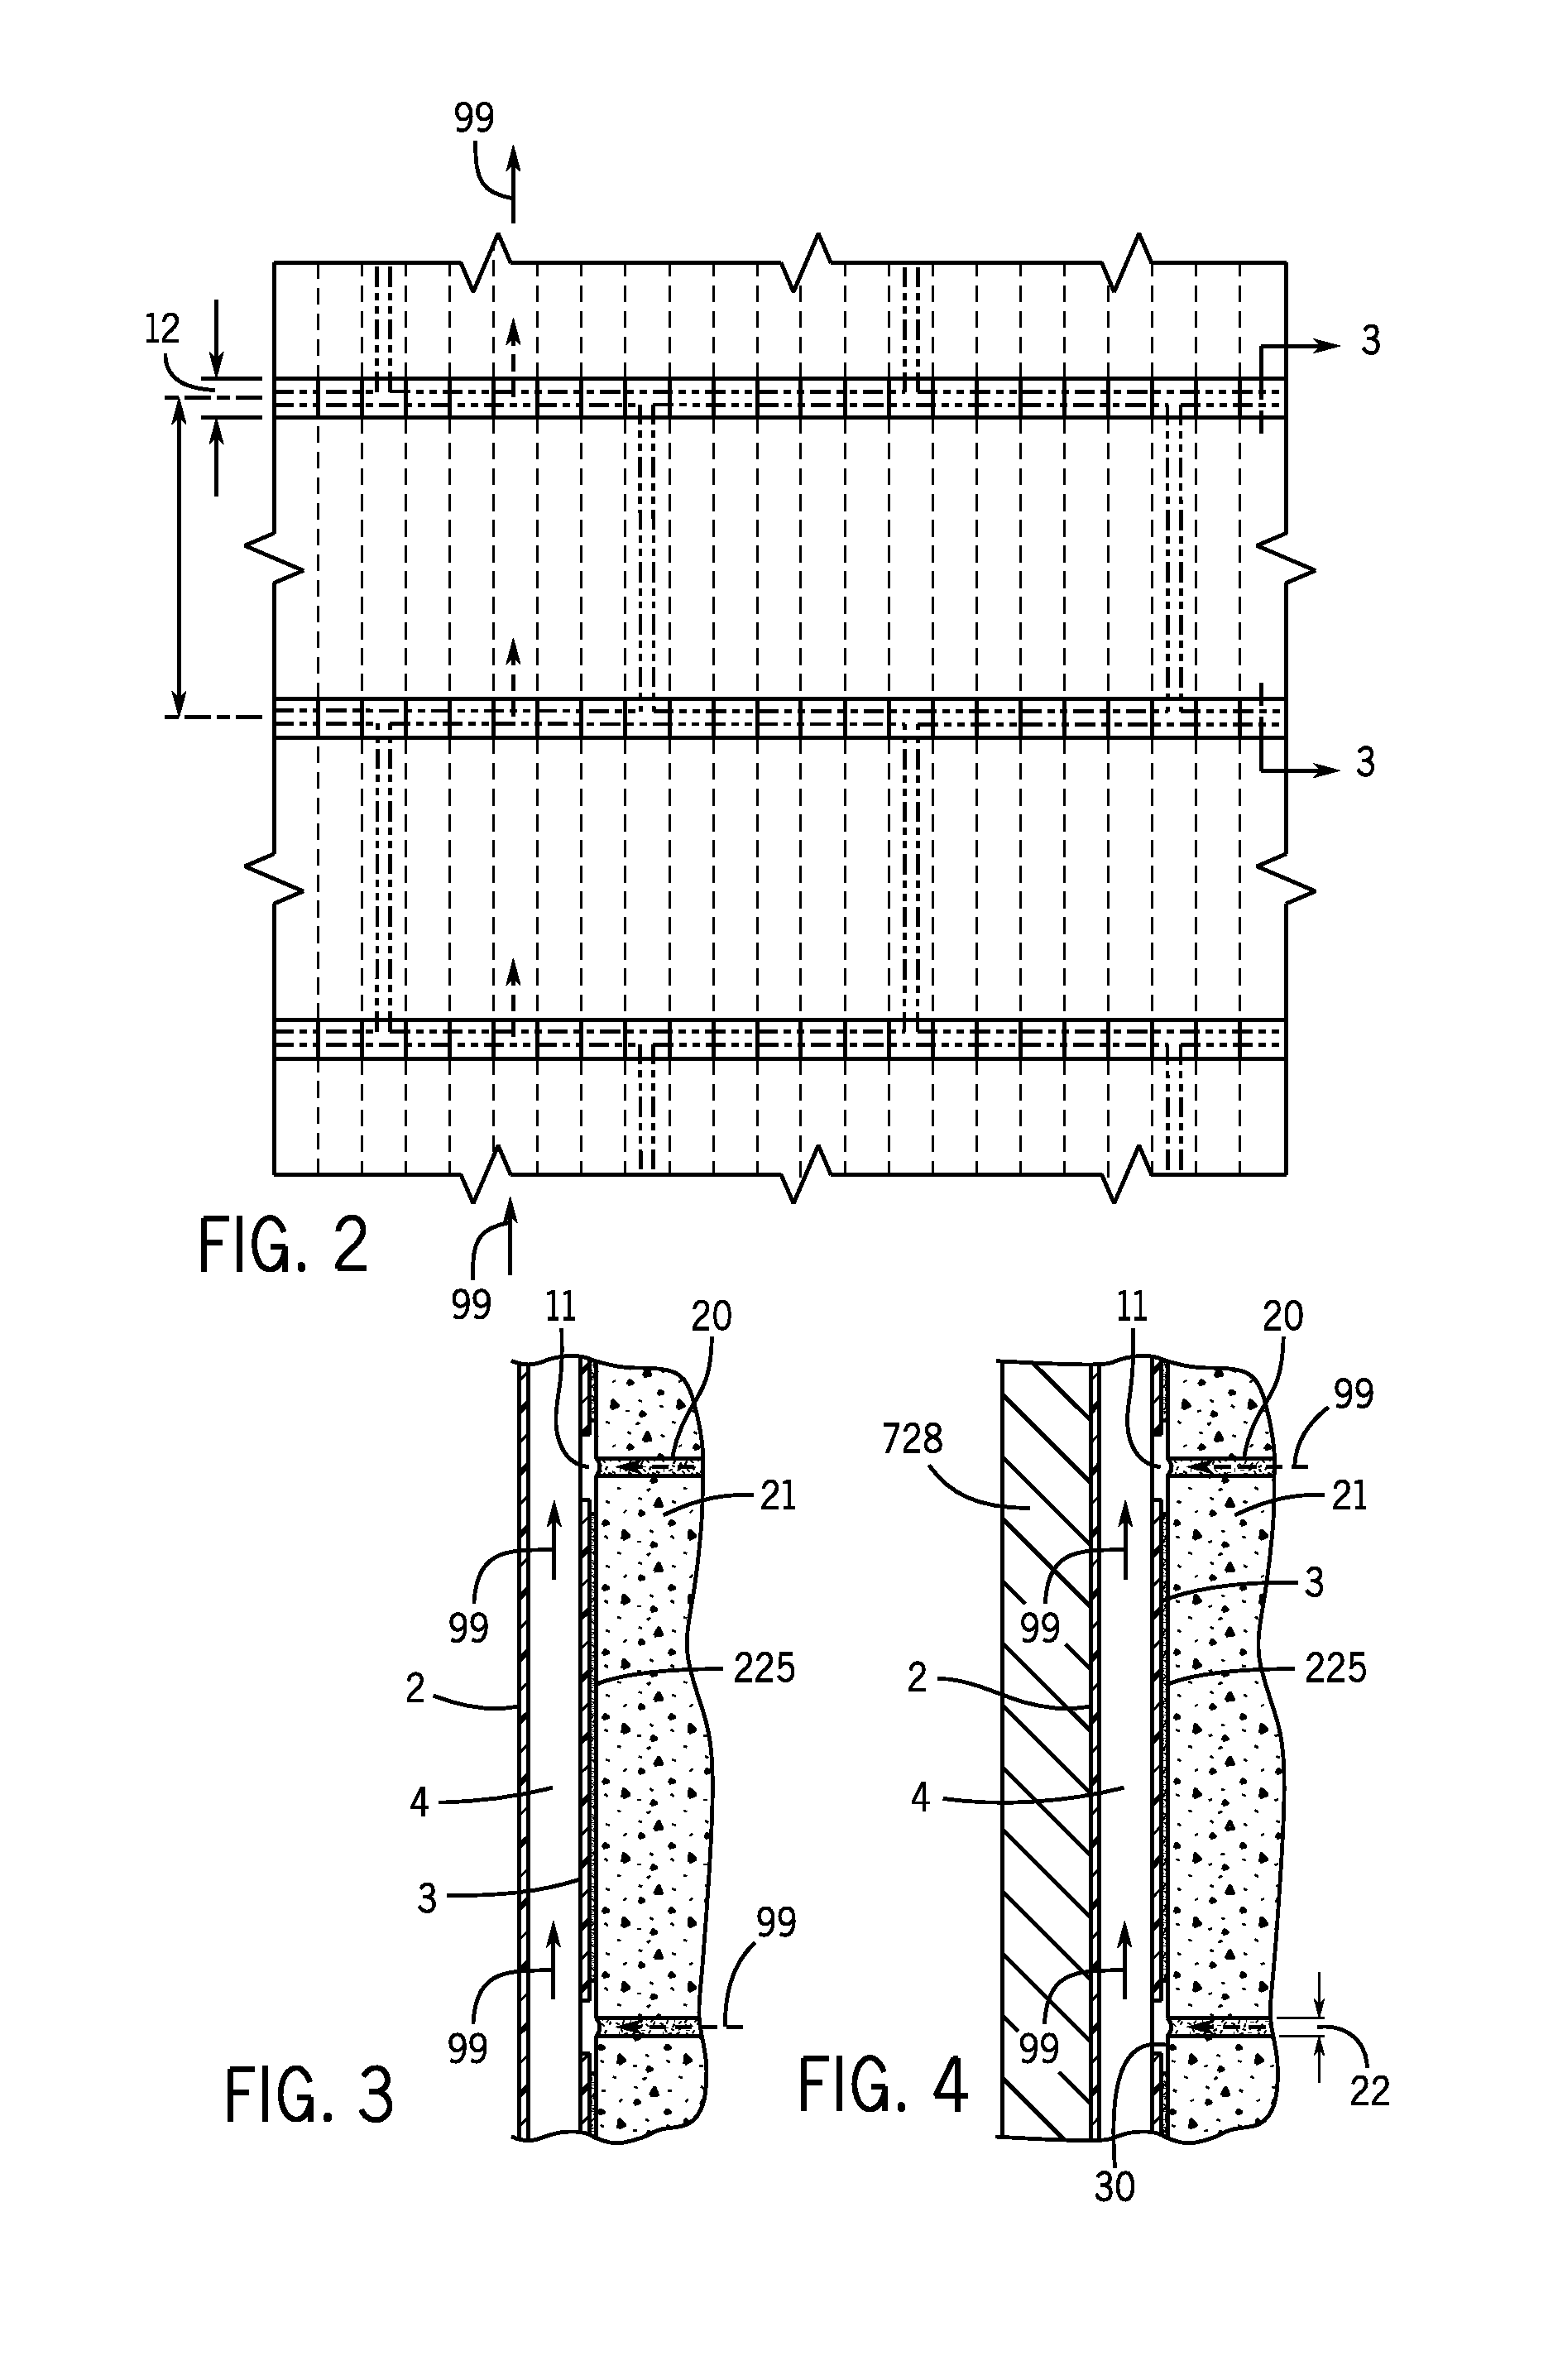 Construction device for releasing moisture from a building